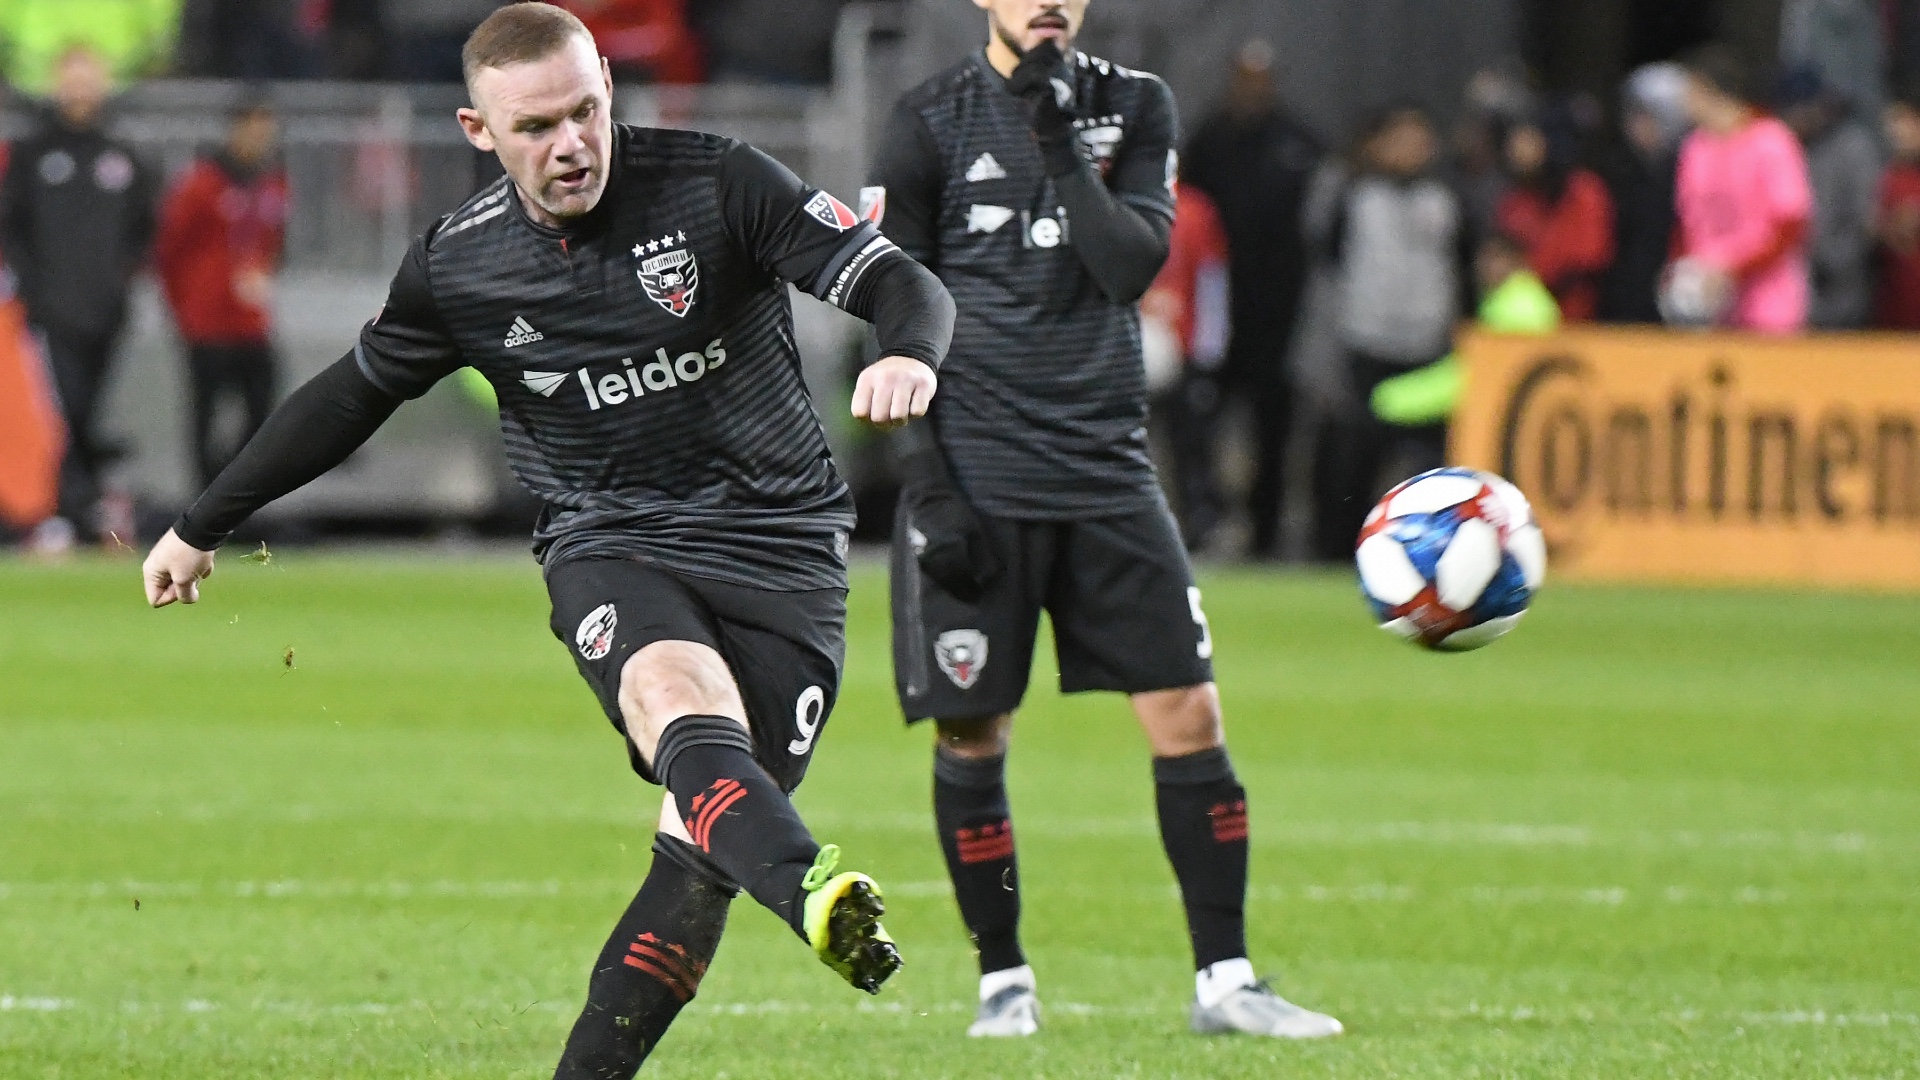 D.C. United Officially Names Wayne Rooney as New Head Coach